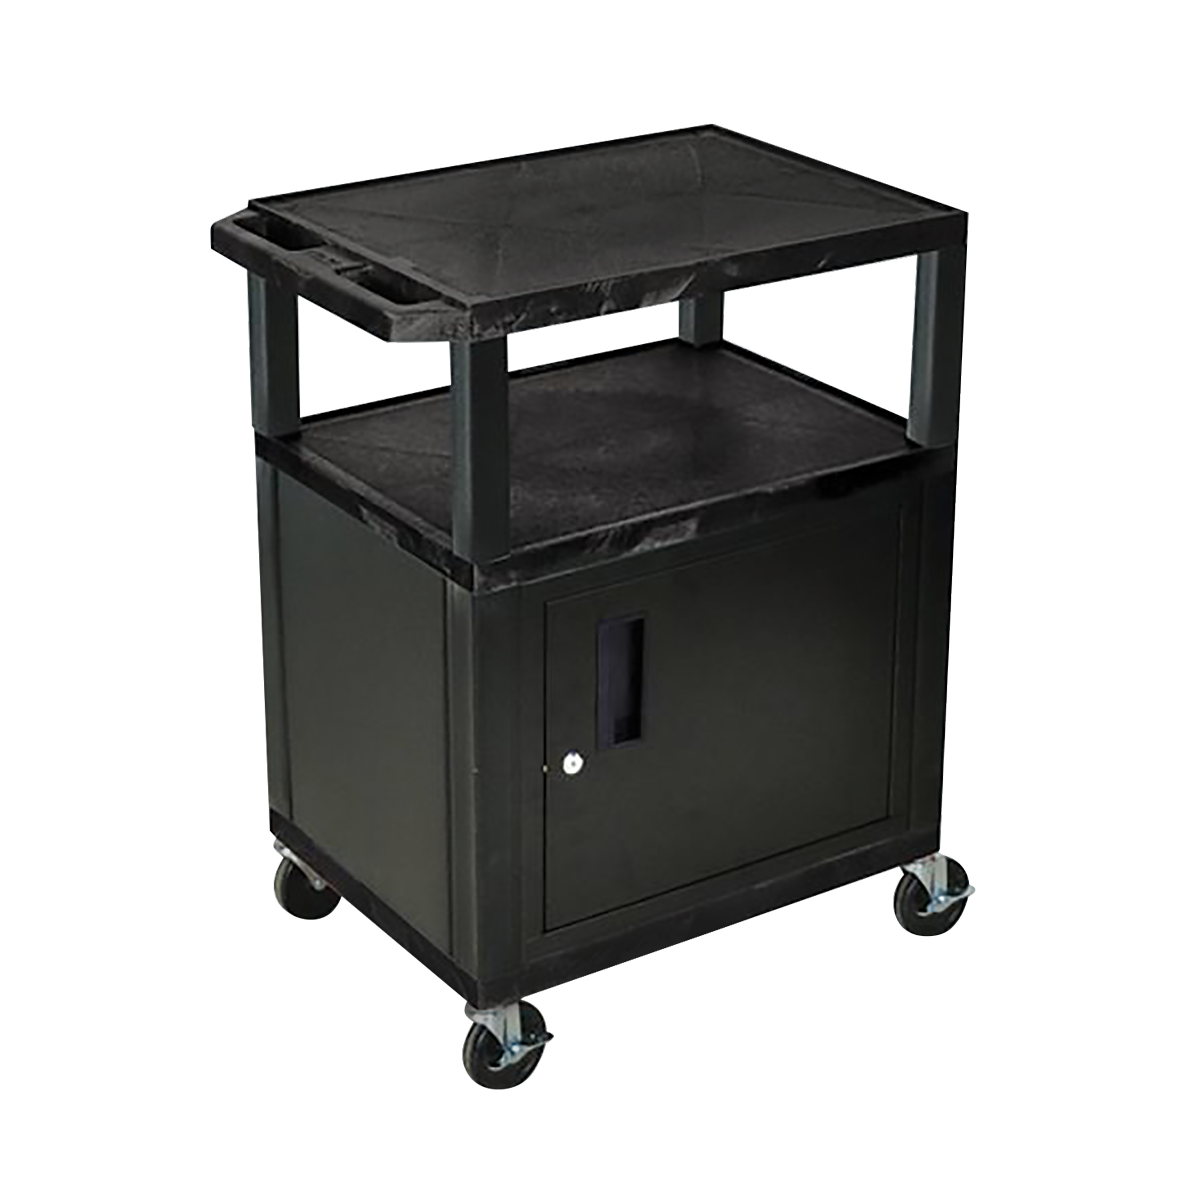 34" 2 Shelf Utility Cart With Cabinet